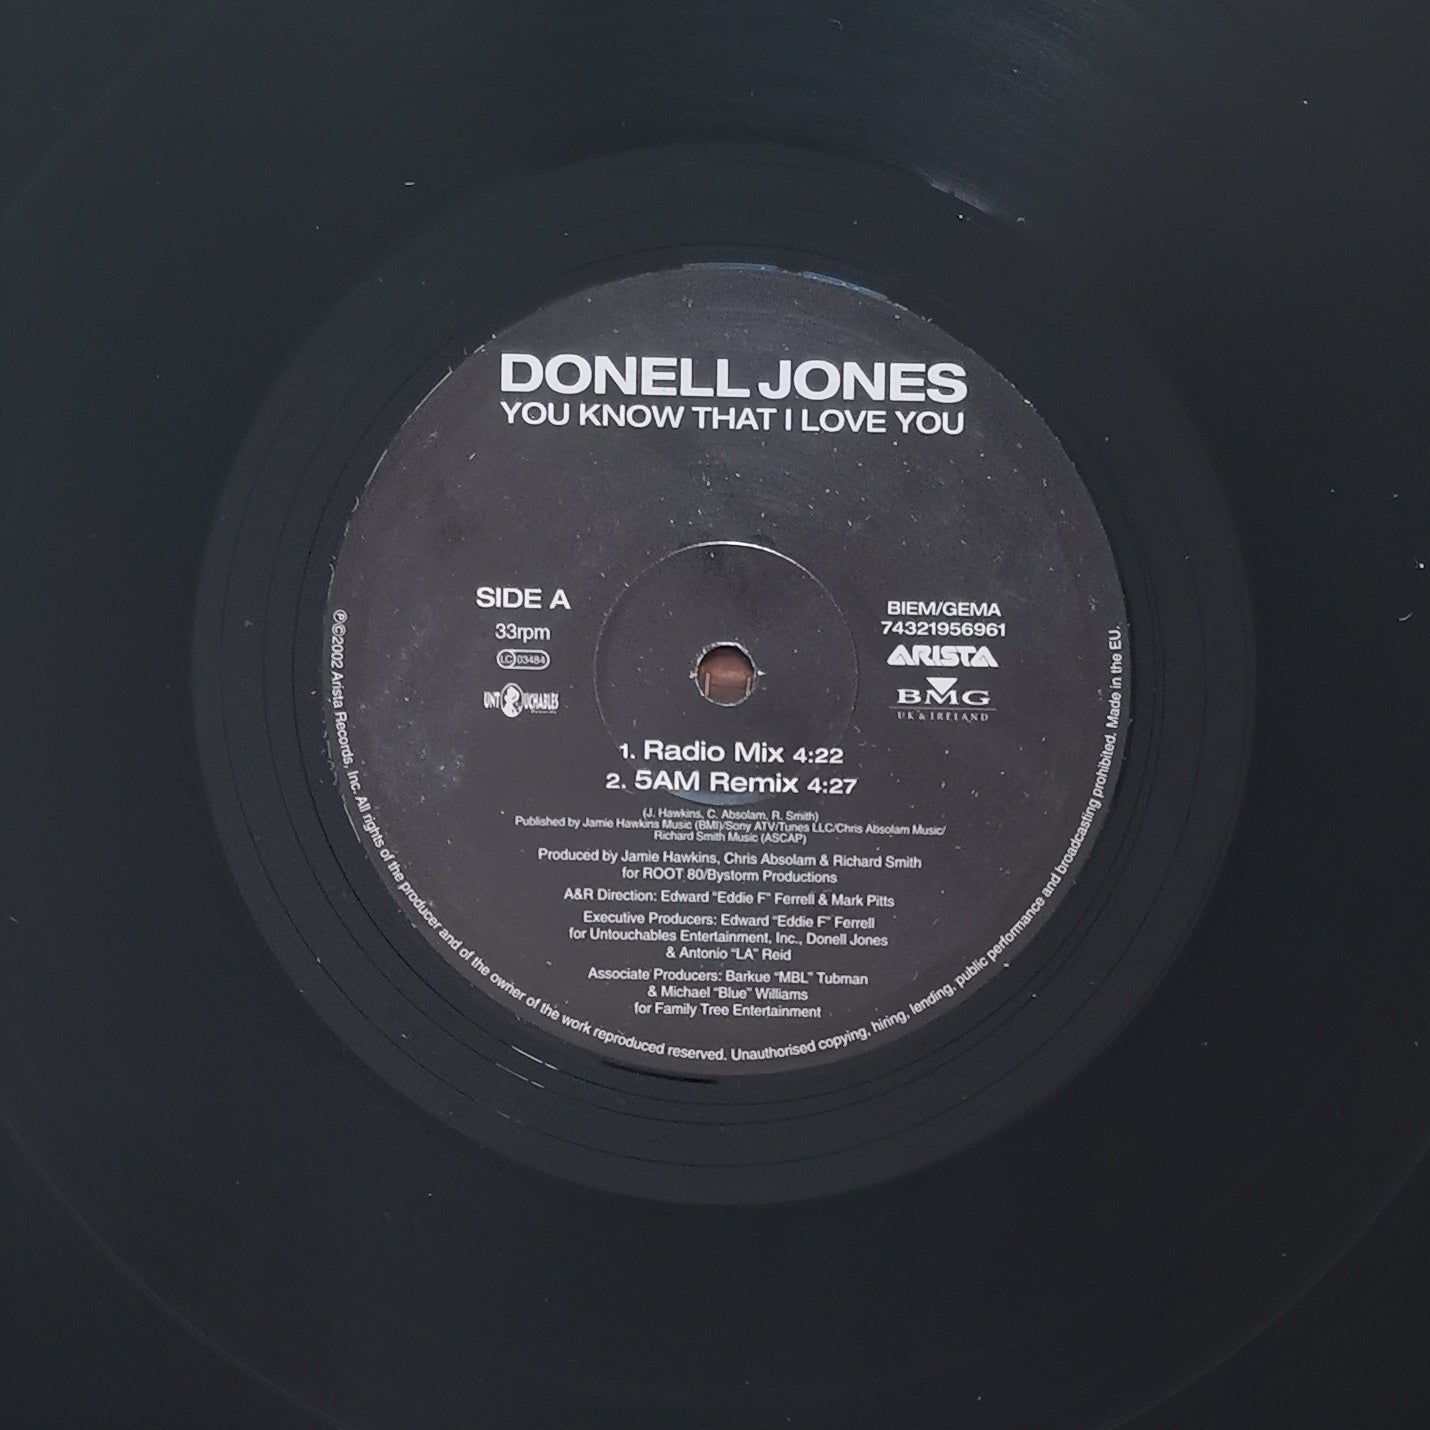 DONELL JONES - You Know That I Love You